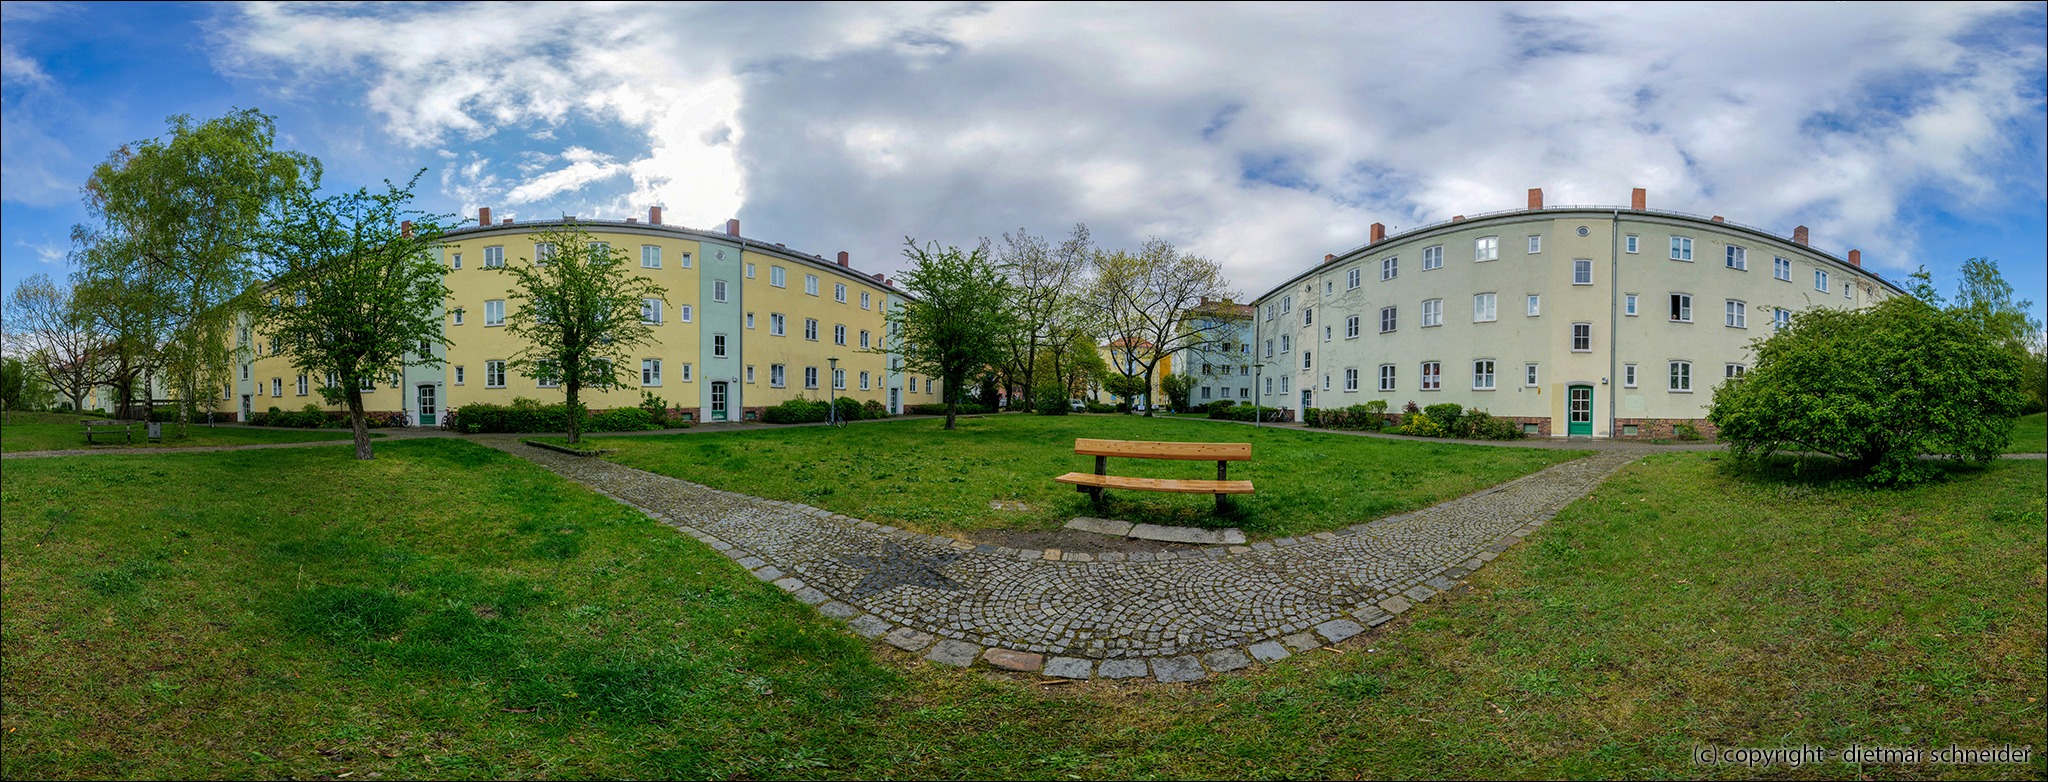 You are currently viewing Panorama – Mierendorffinsel – Olbersstrasse 49-51 (16.04.2017)